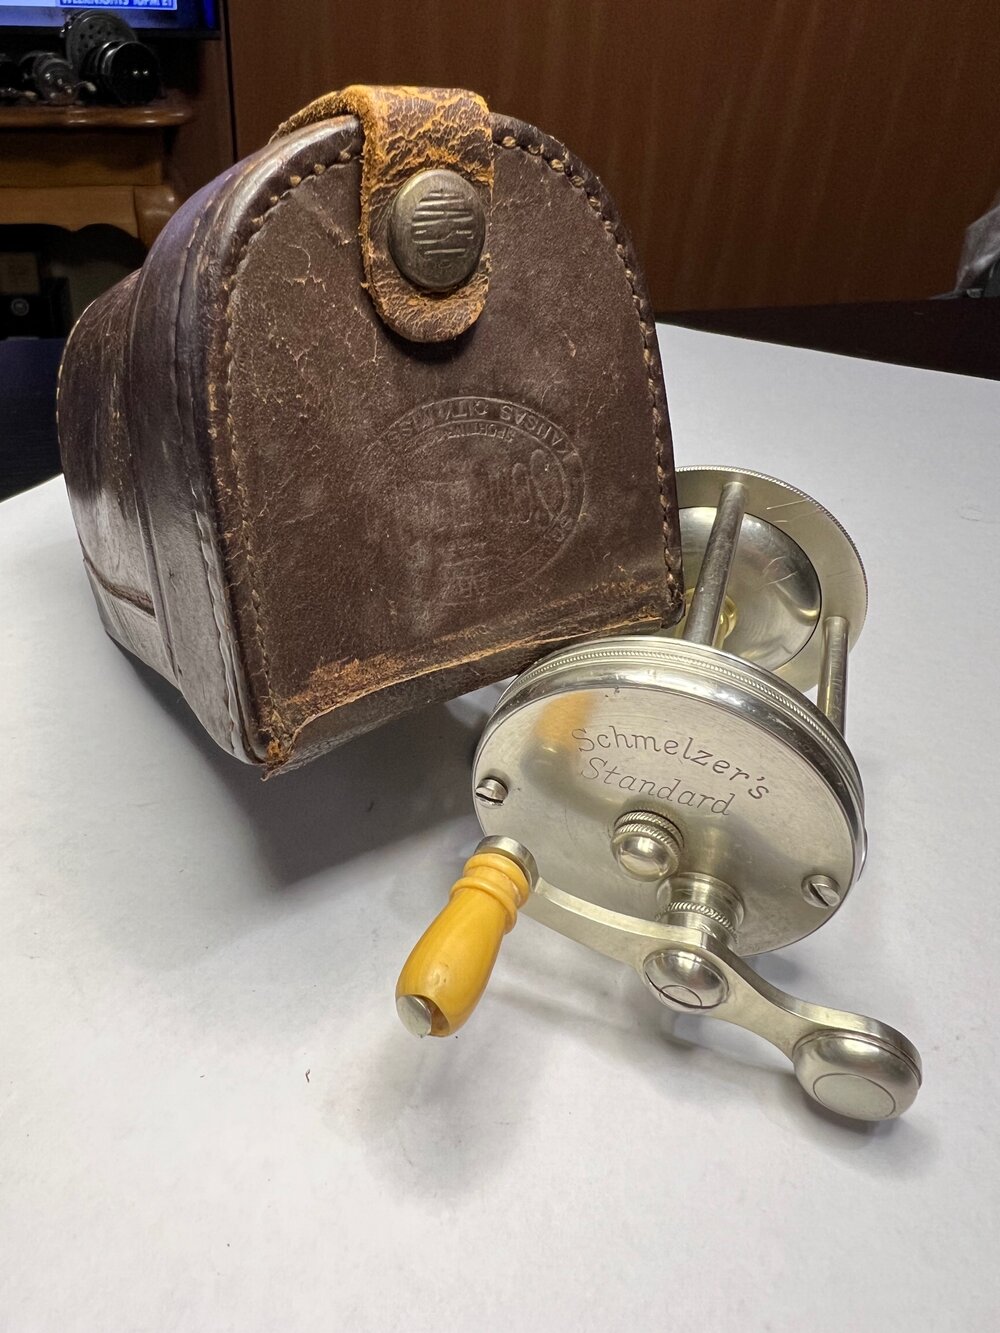 Montague SCHMELZER'S STANDARD German Silver 60 yard with Original Marked  Leather Case Circa-1908 — VINTAGE FISHING REELS